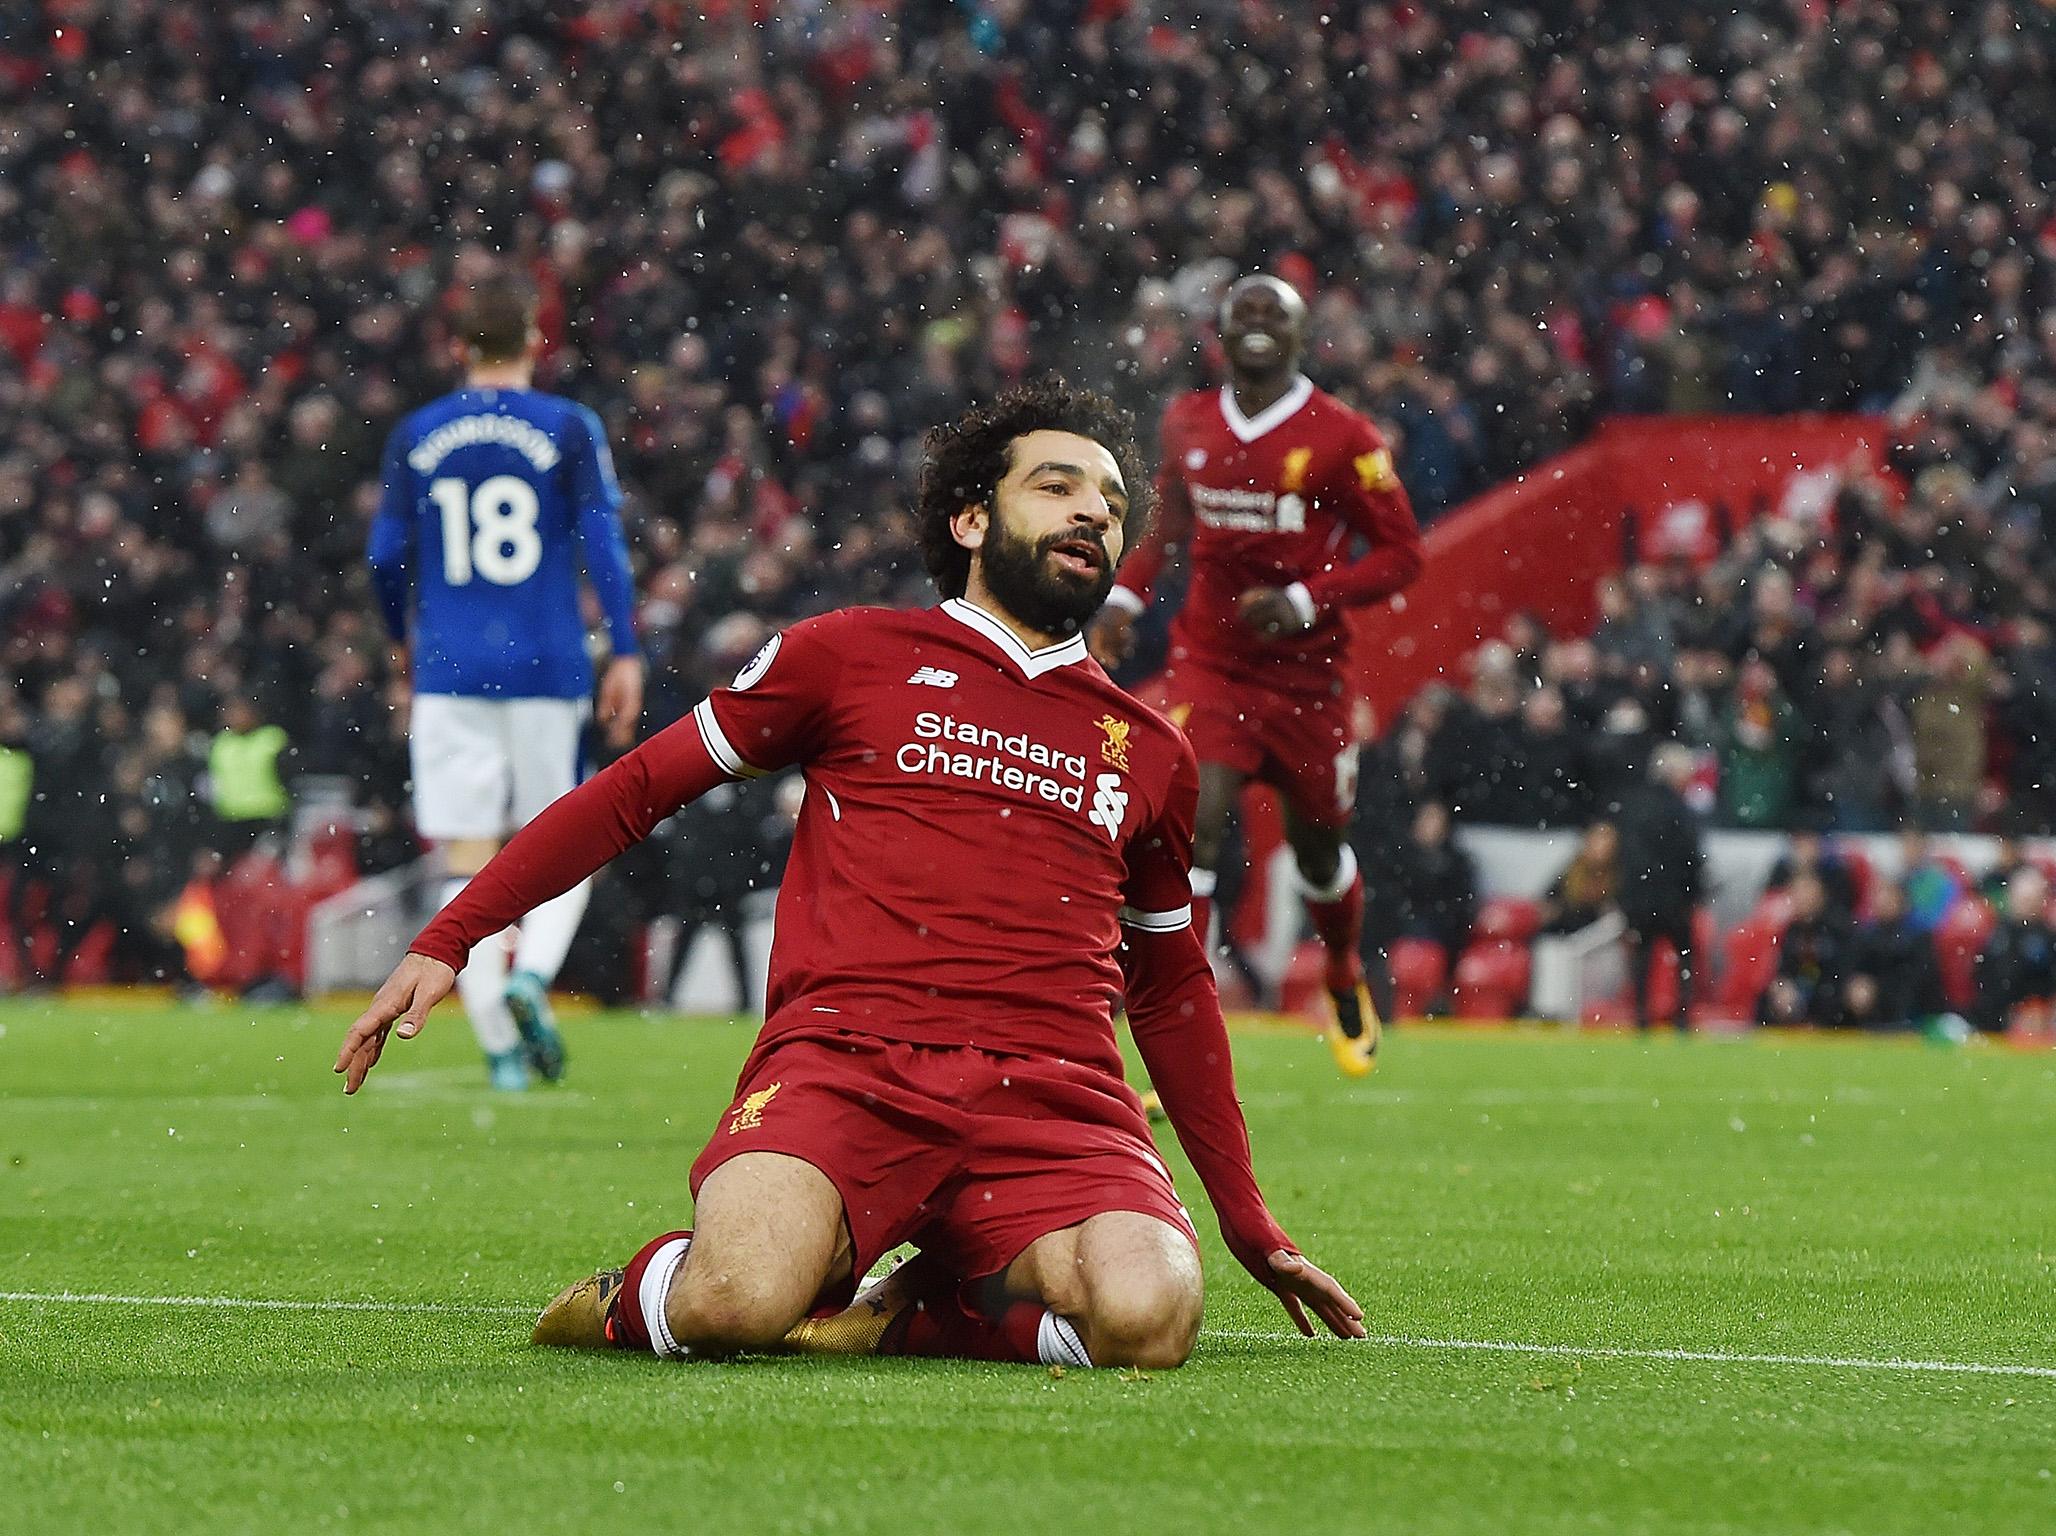 Mohamed Salah scored in the Merseyside derby before coming off